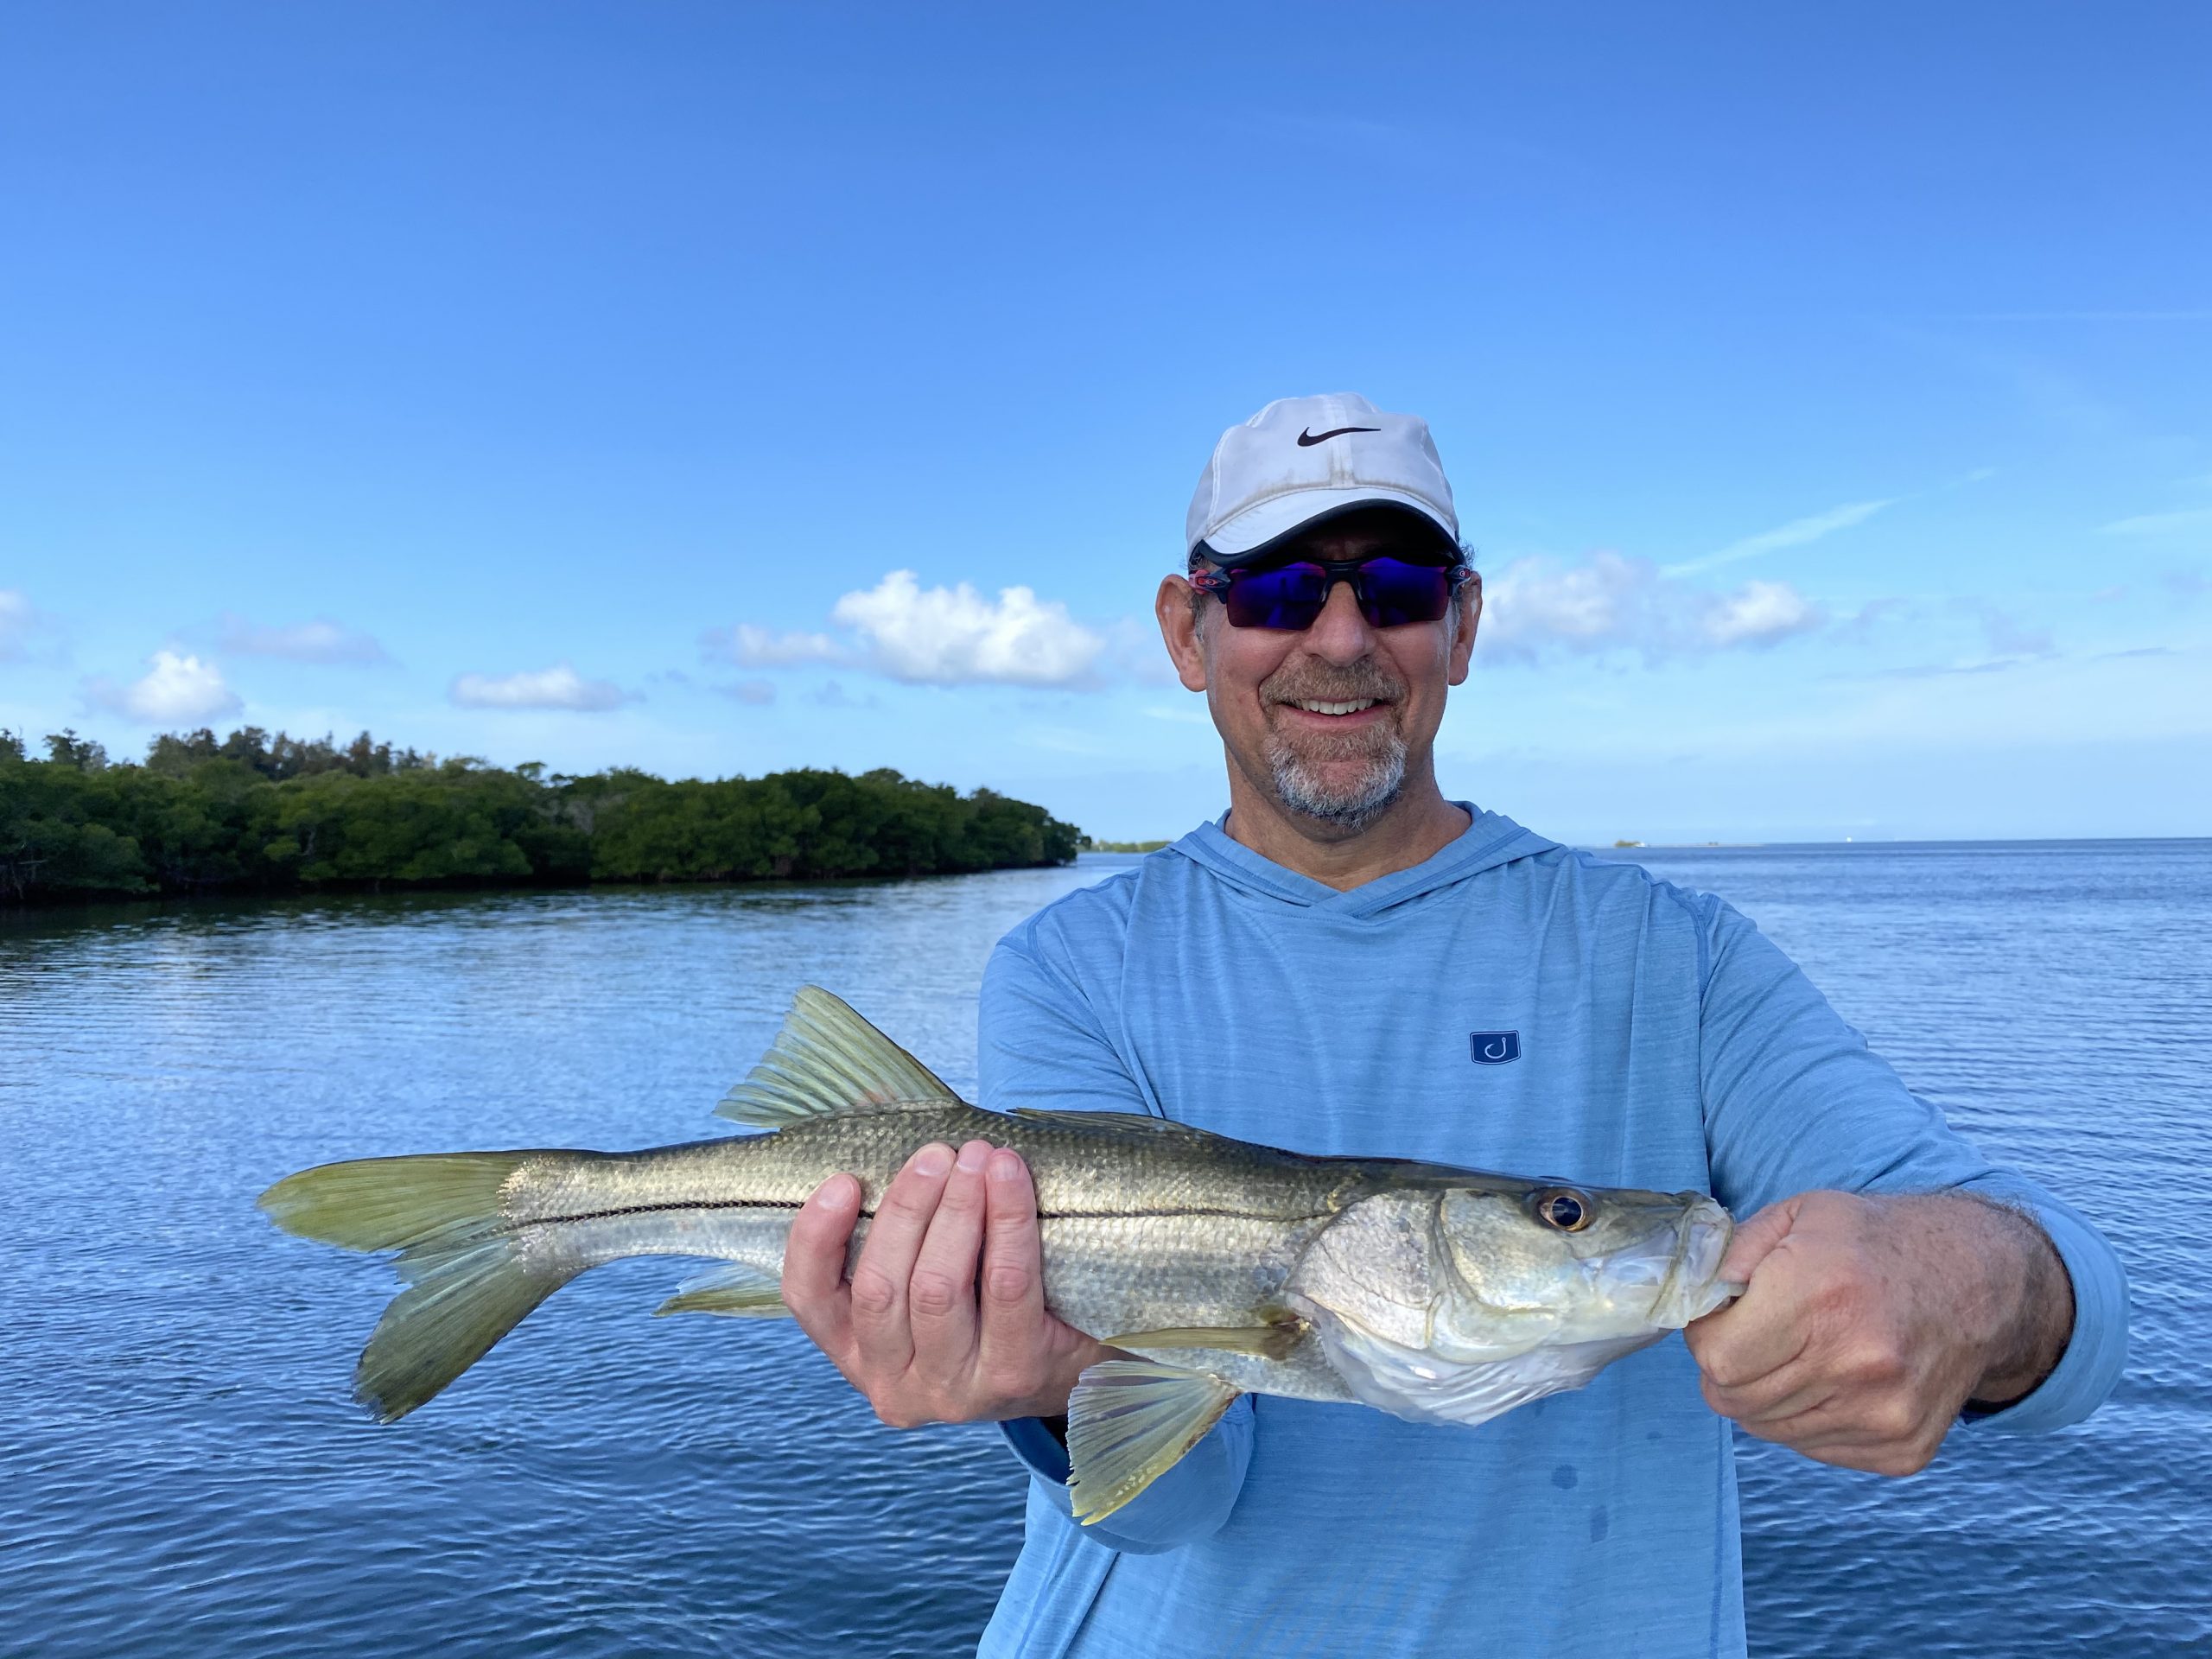 An angler smiles while holding a snook caught on a paddletail in lower tampa bay